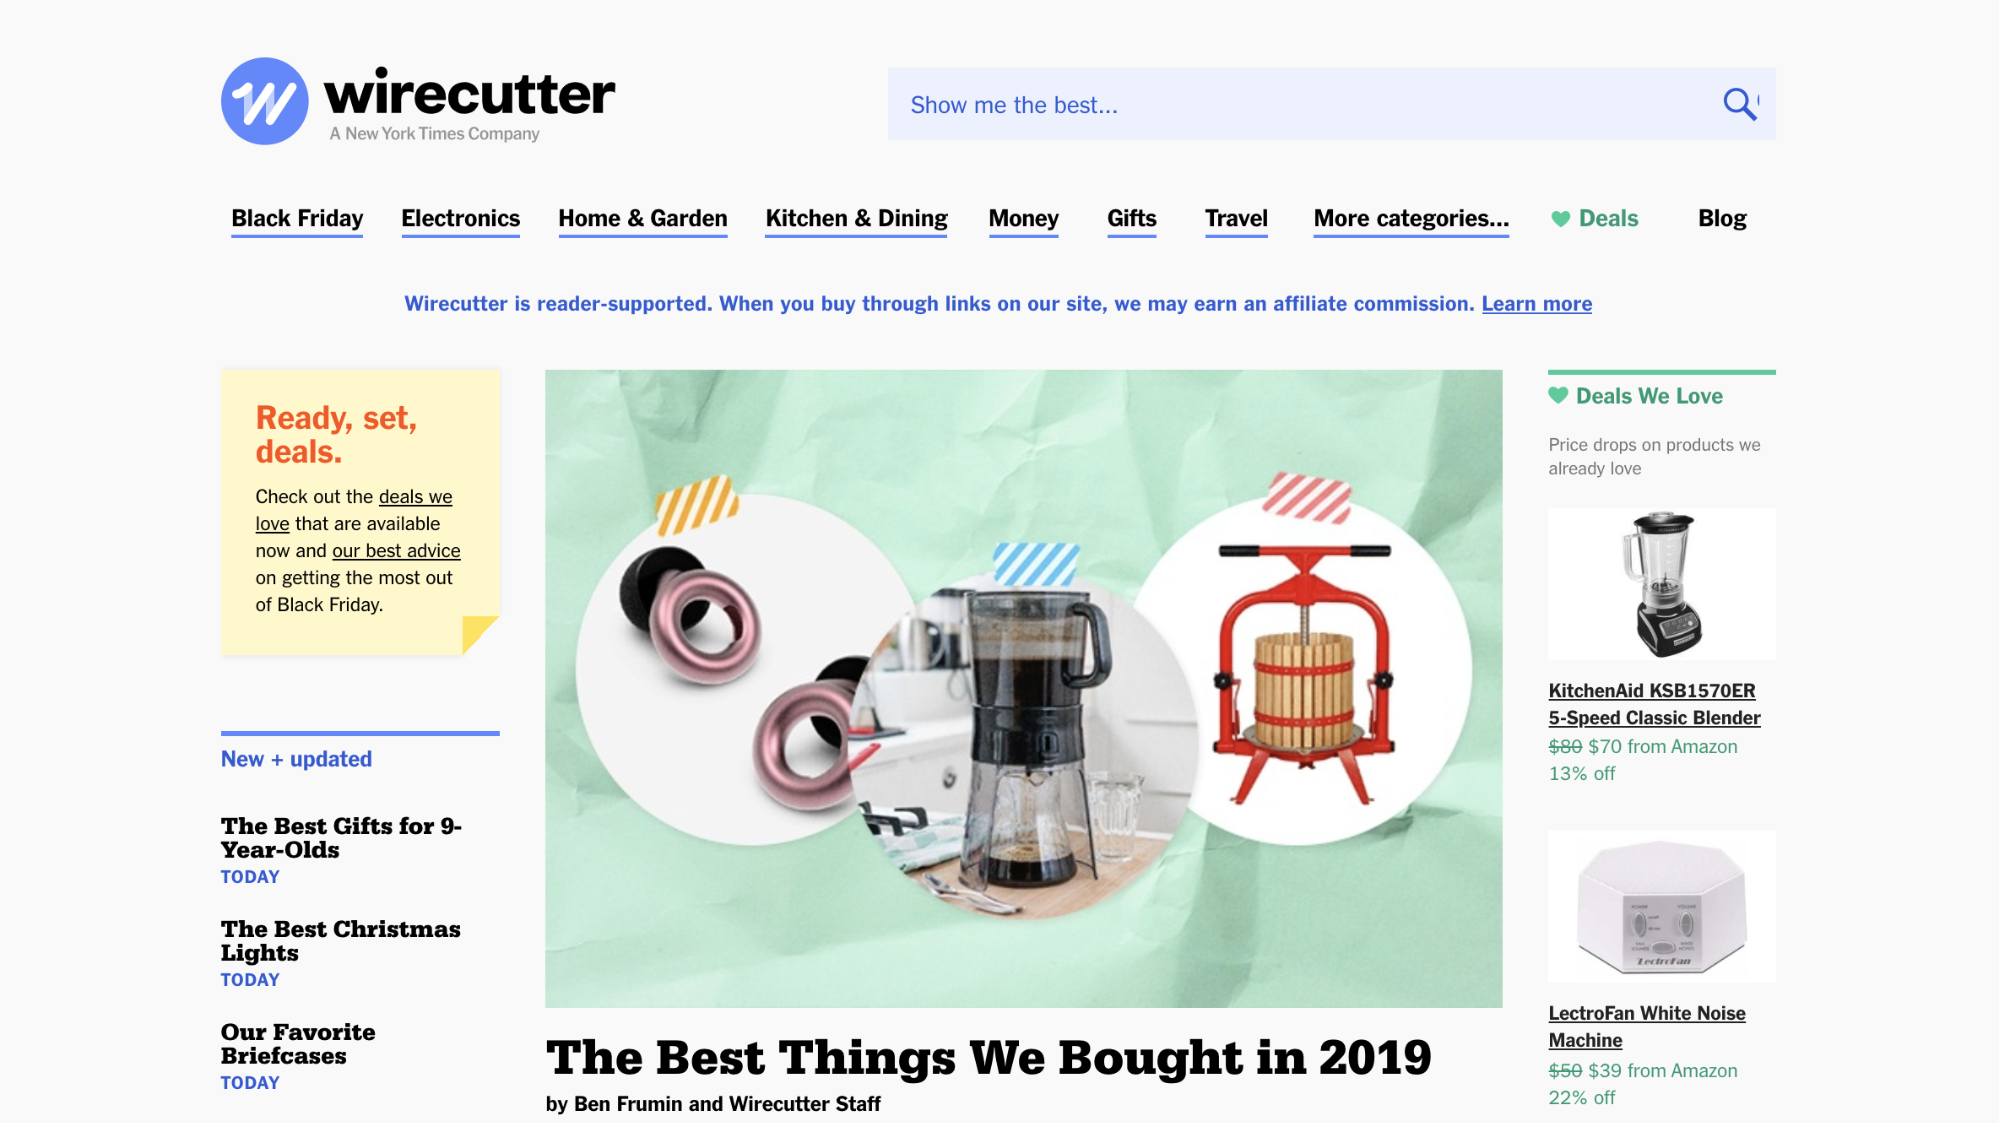 Image of Wirecutter's homepage, a business that monetizes writing reviews and roundups of home products like blenders or white noise machines